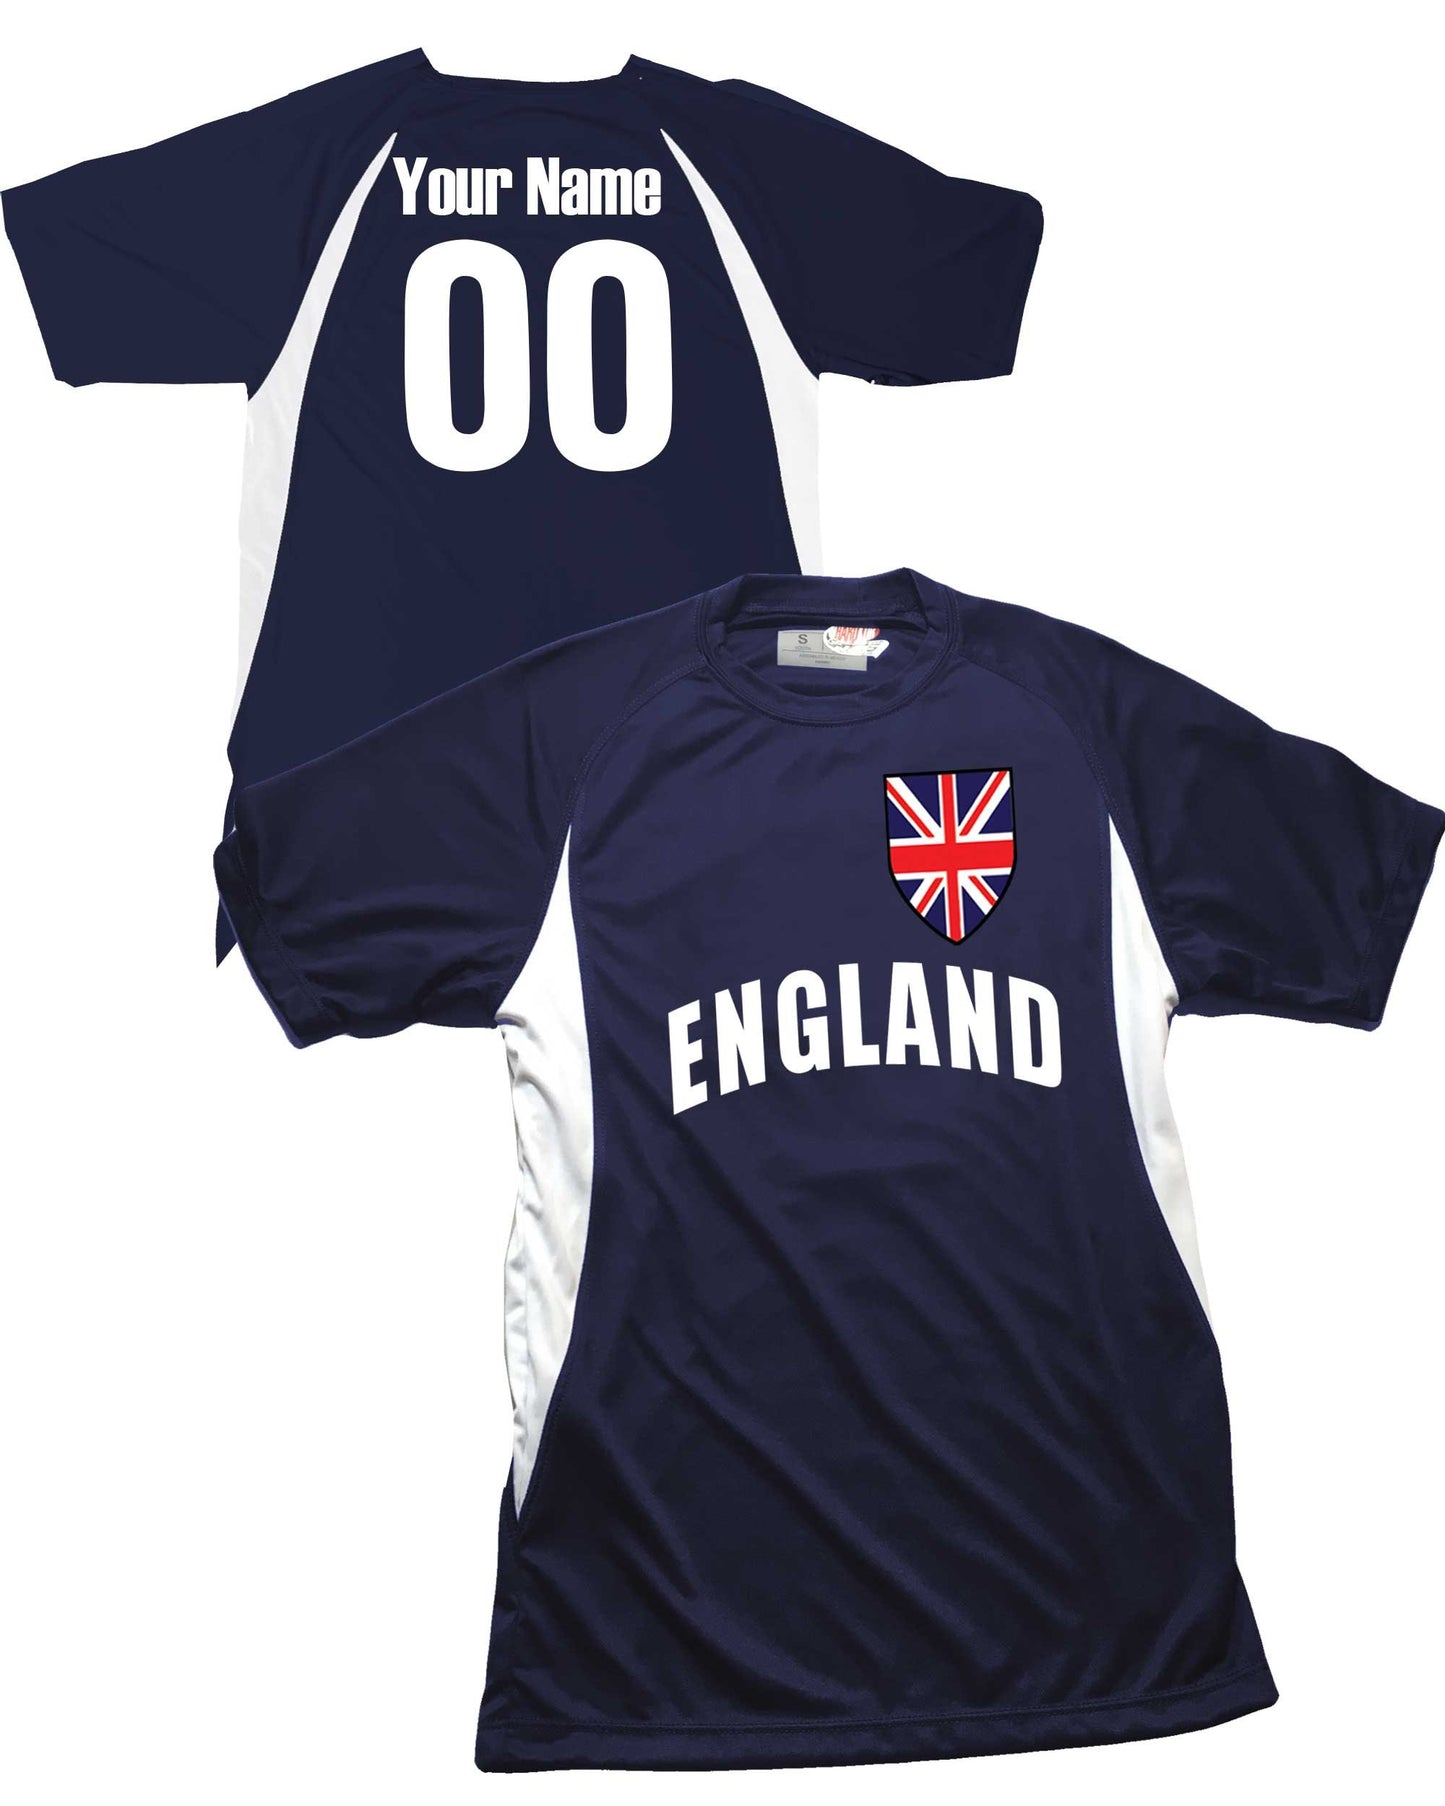 England Soccer Jersey Union Jack Great Britain Shield Design Customized with Your Names and Numbers in Your choice of Popular Colors